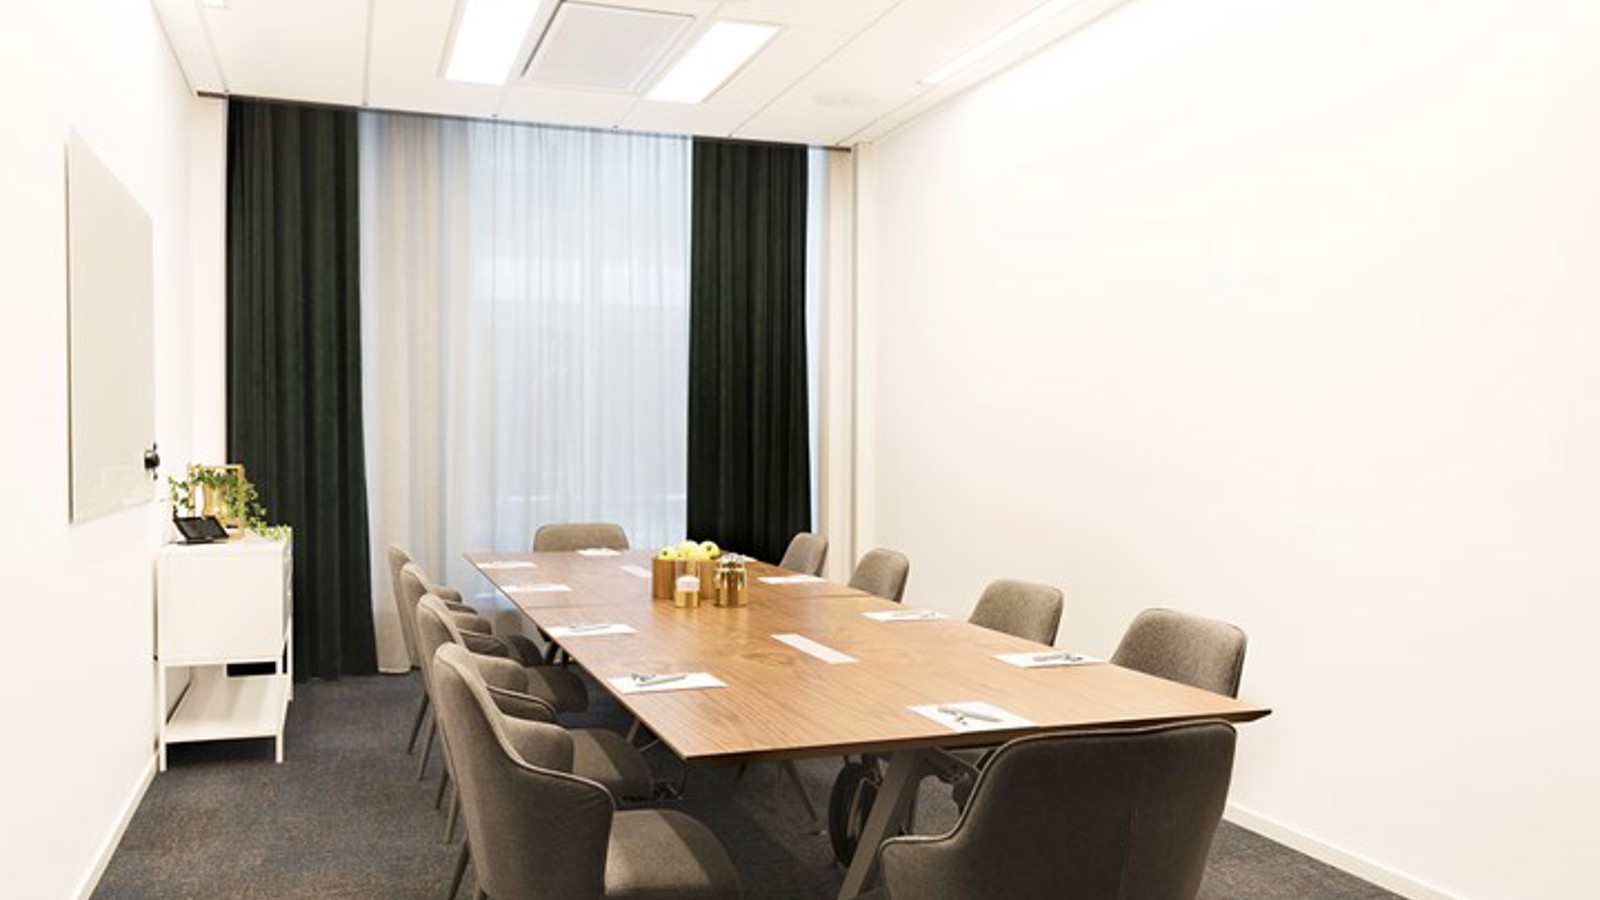 Board room with white walls and gray carpet